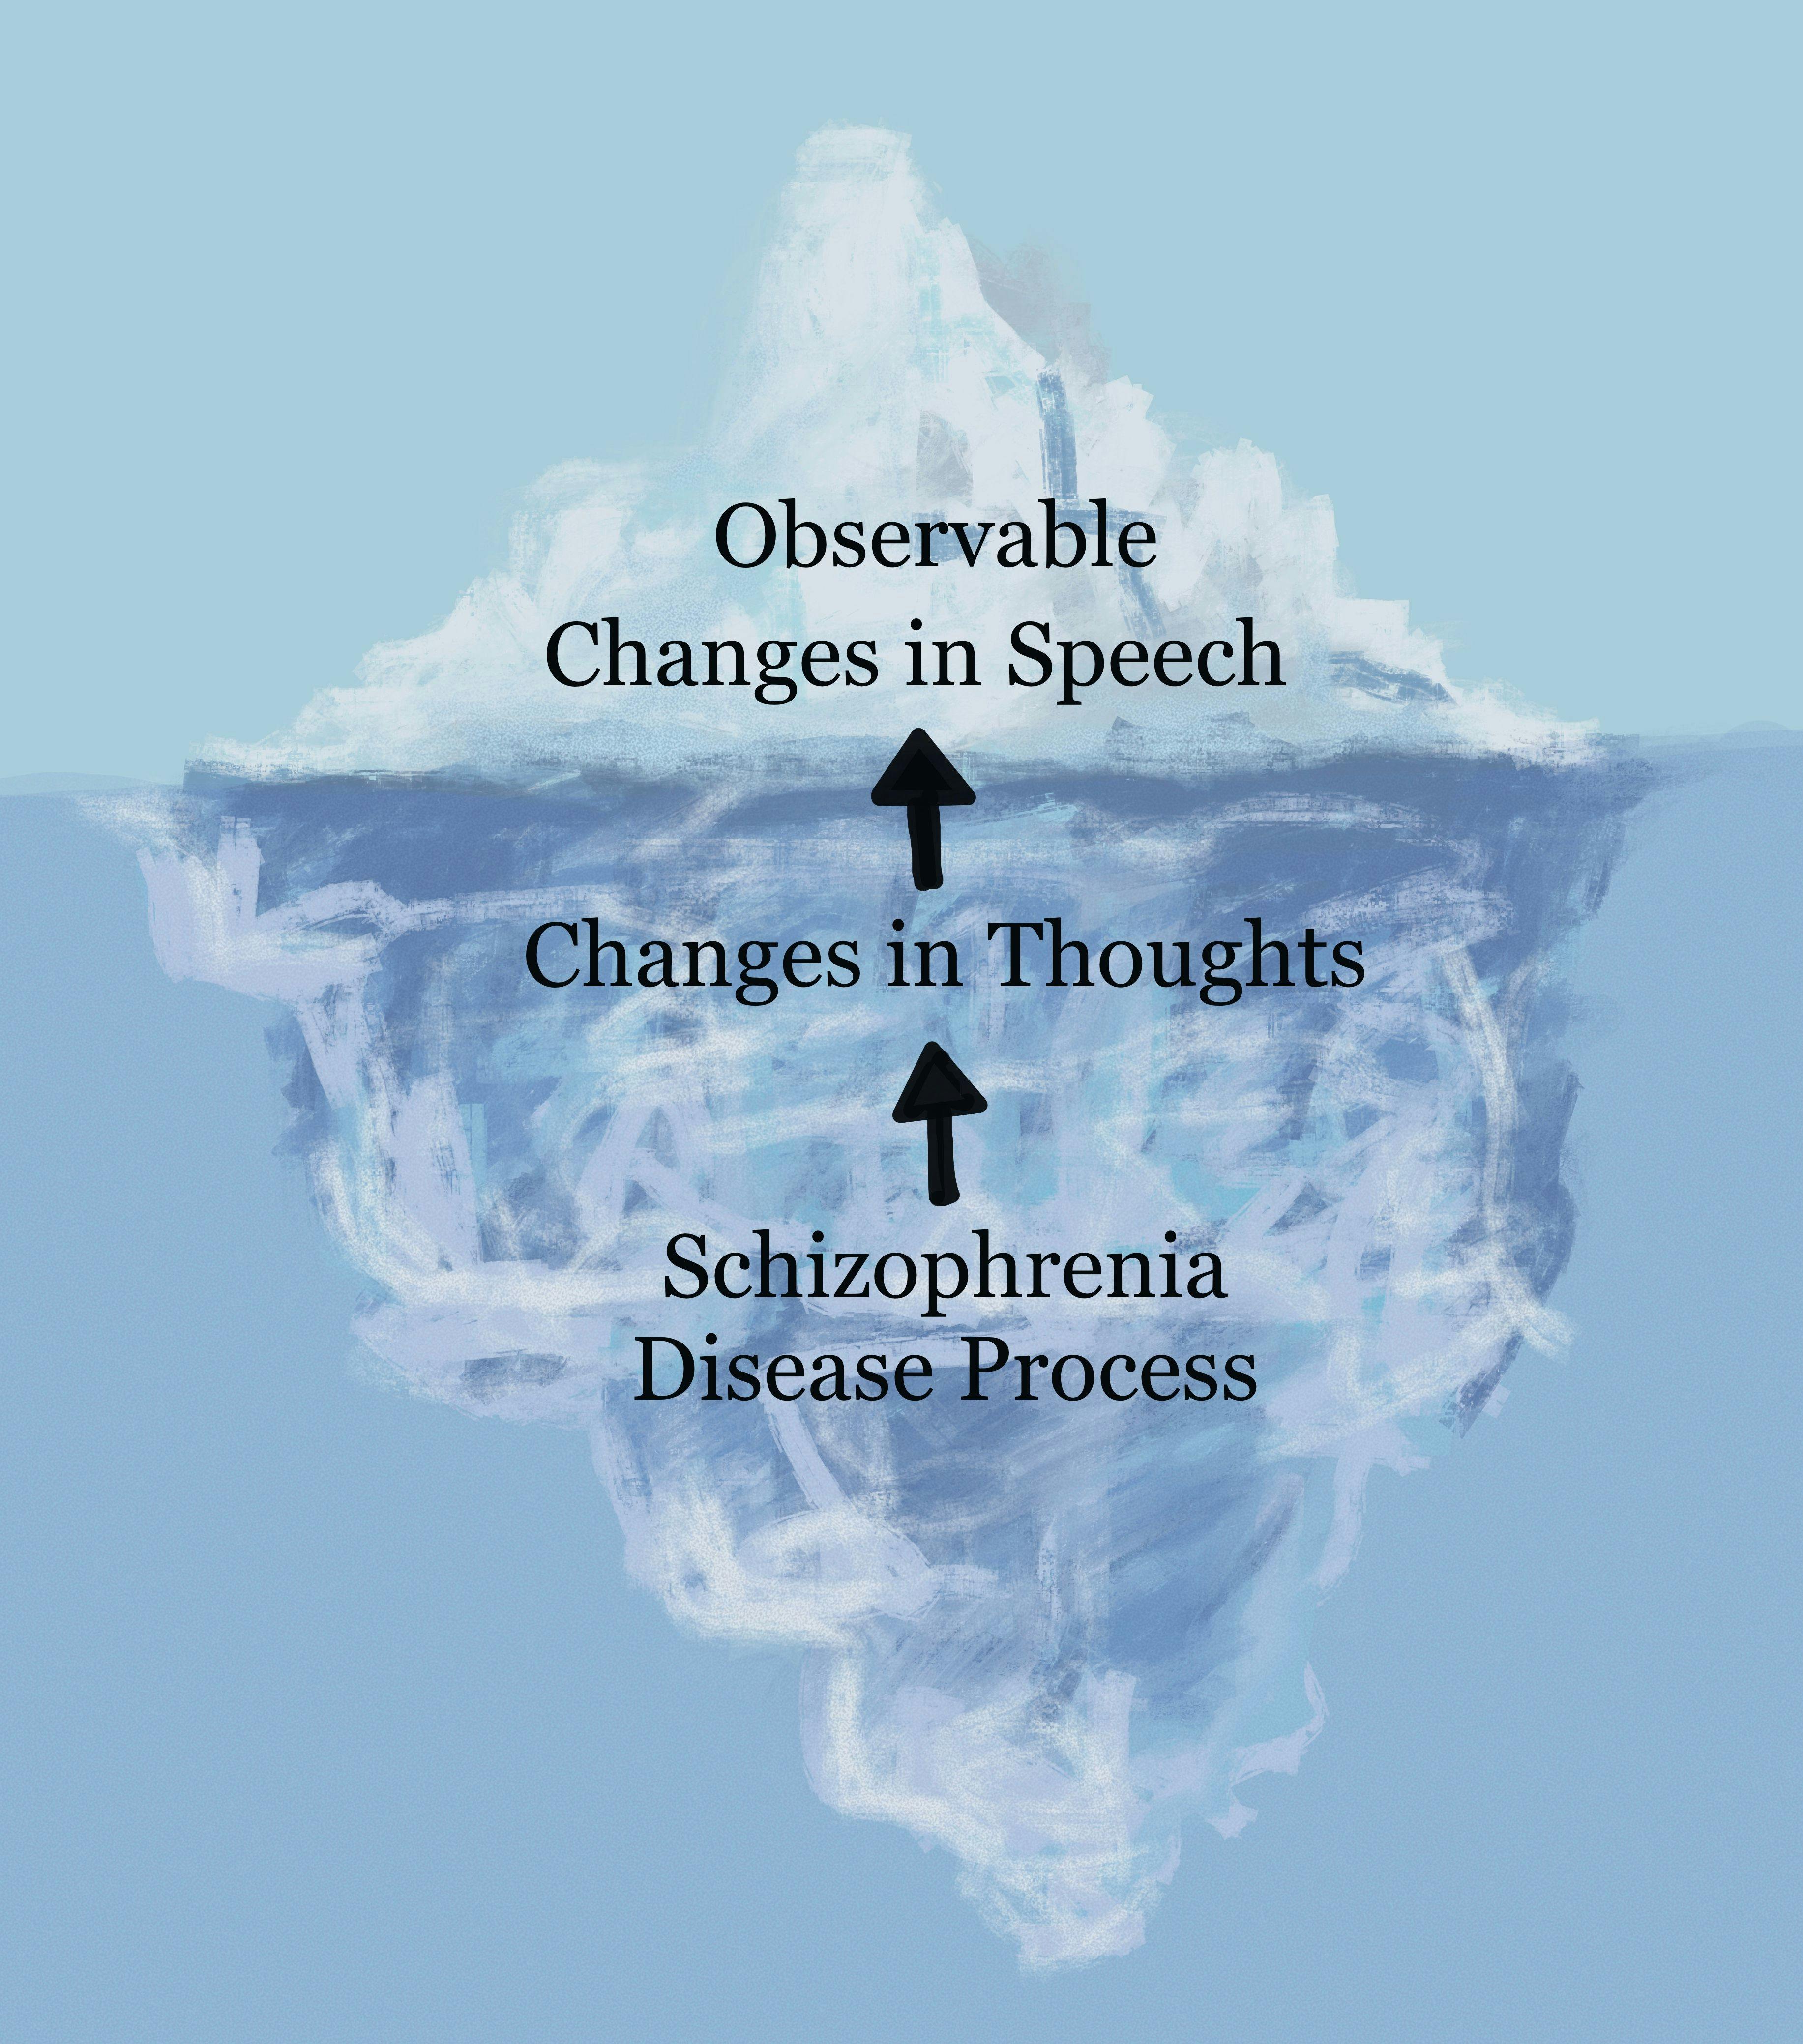 Speech Is the Observable Reflection of Underlying Disease Processes